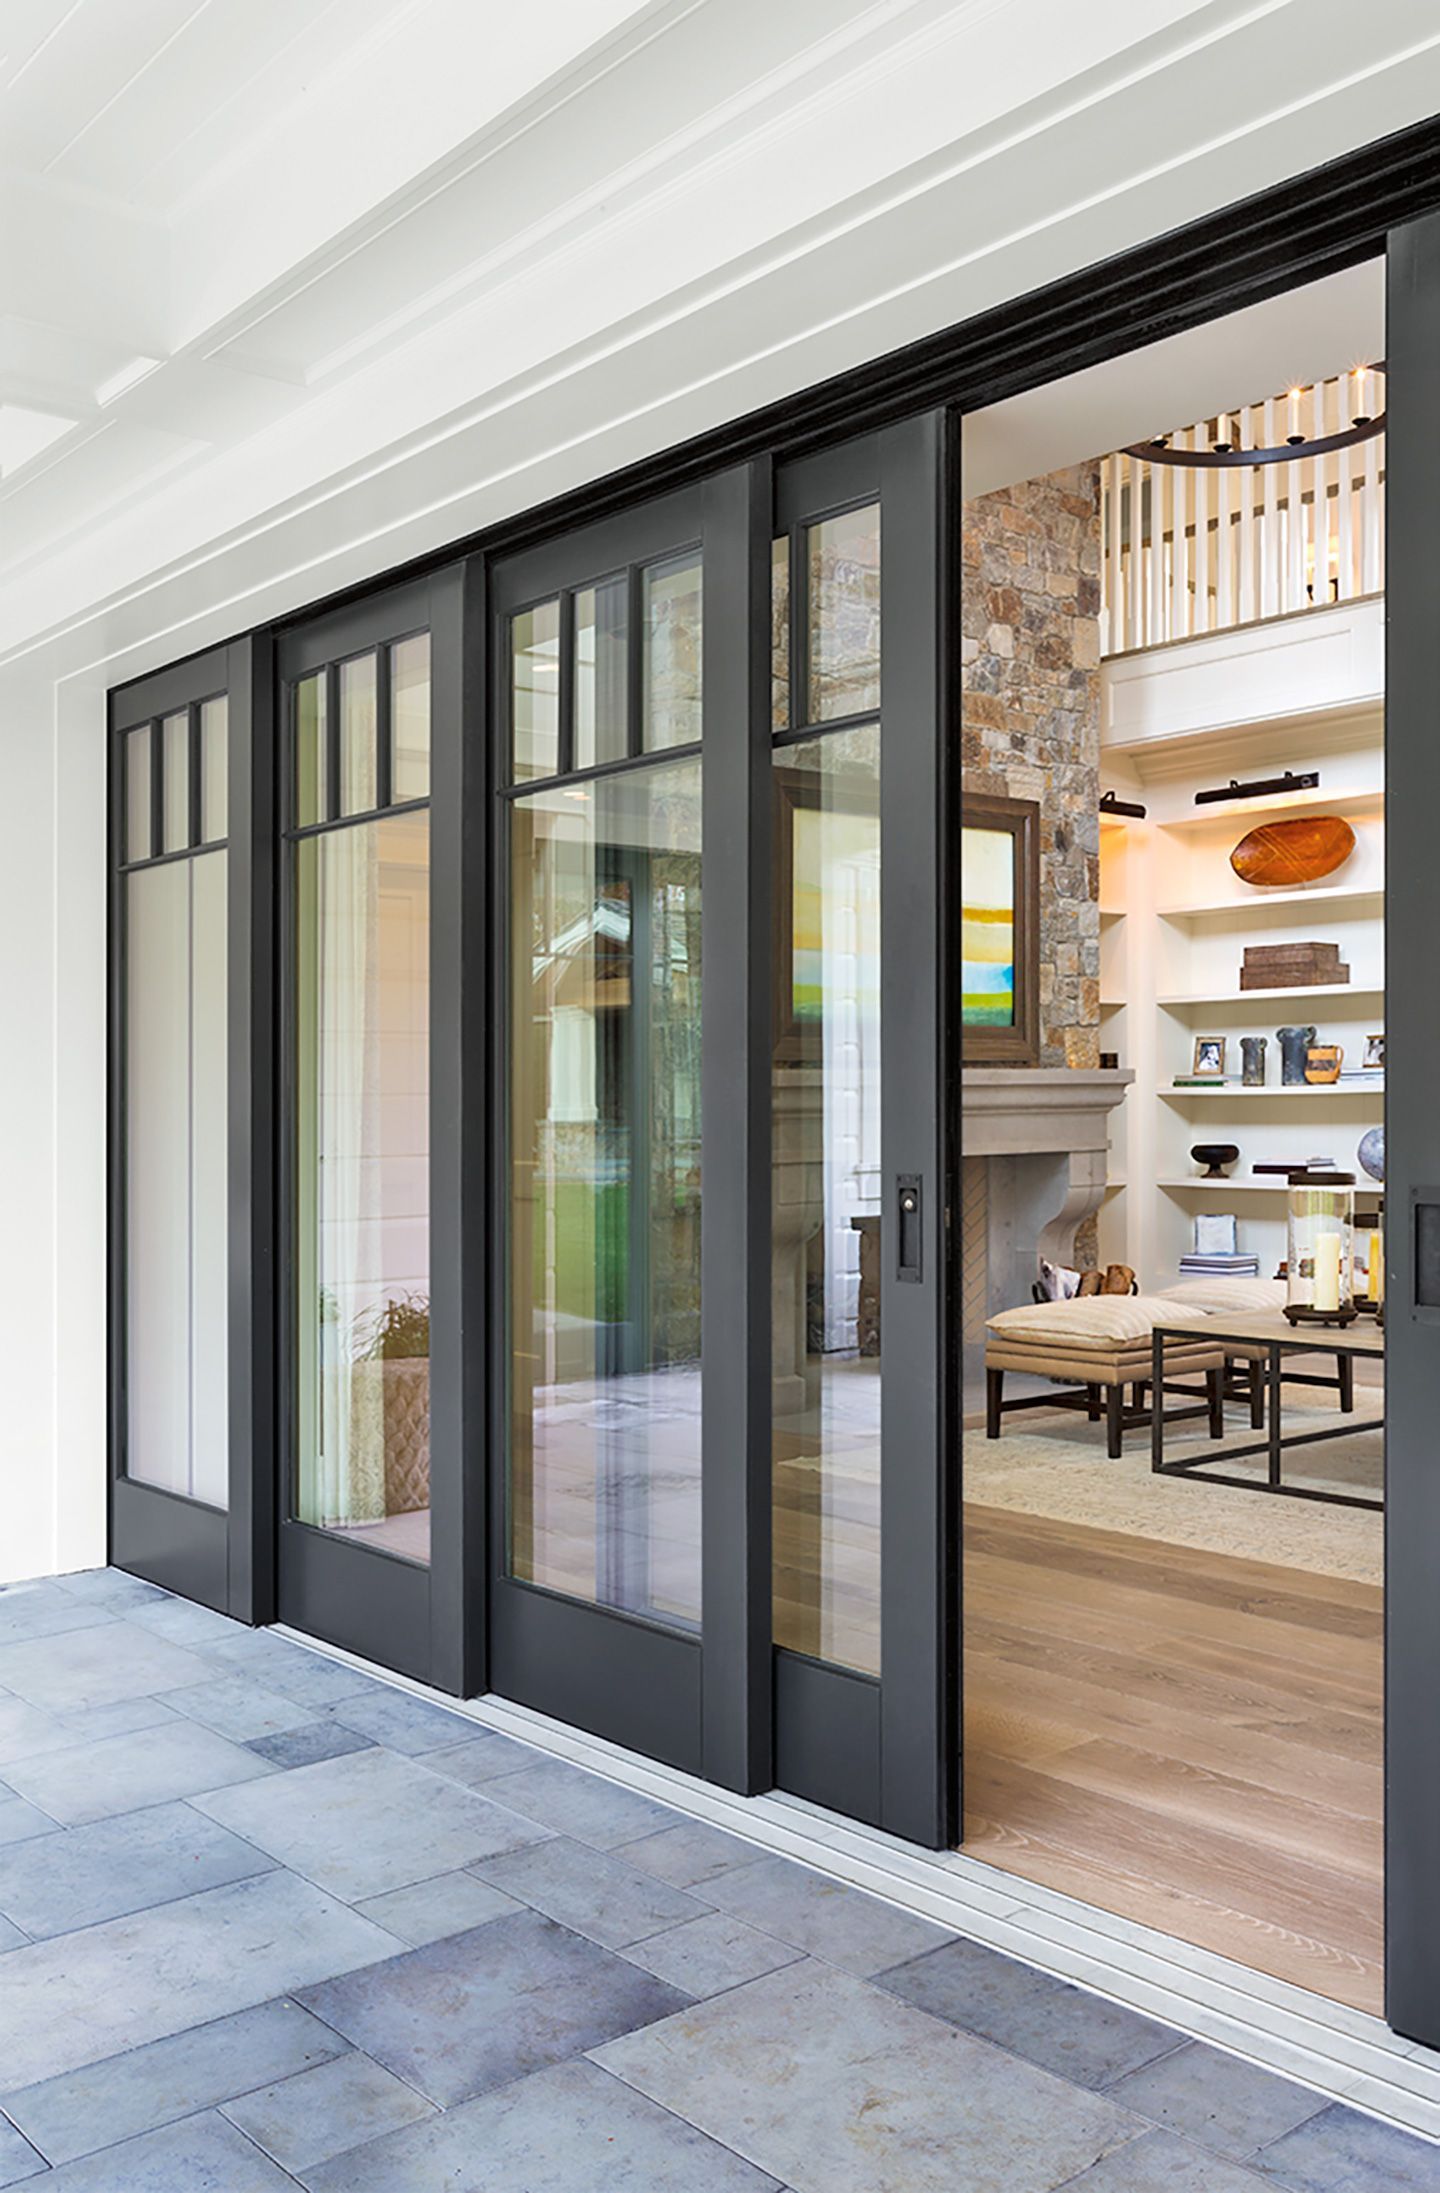 What You Need to Know Before Selecting a New Patio Door